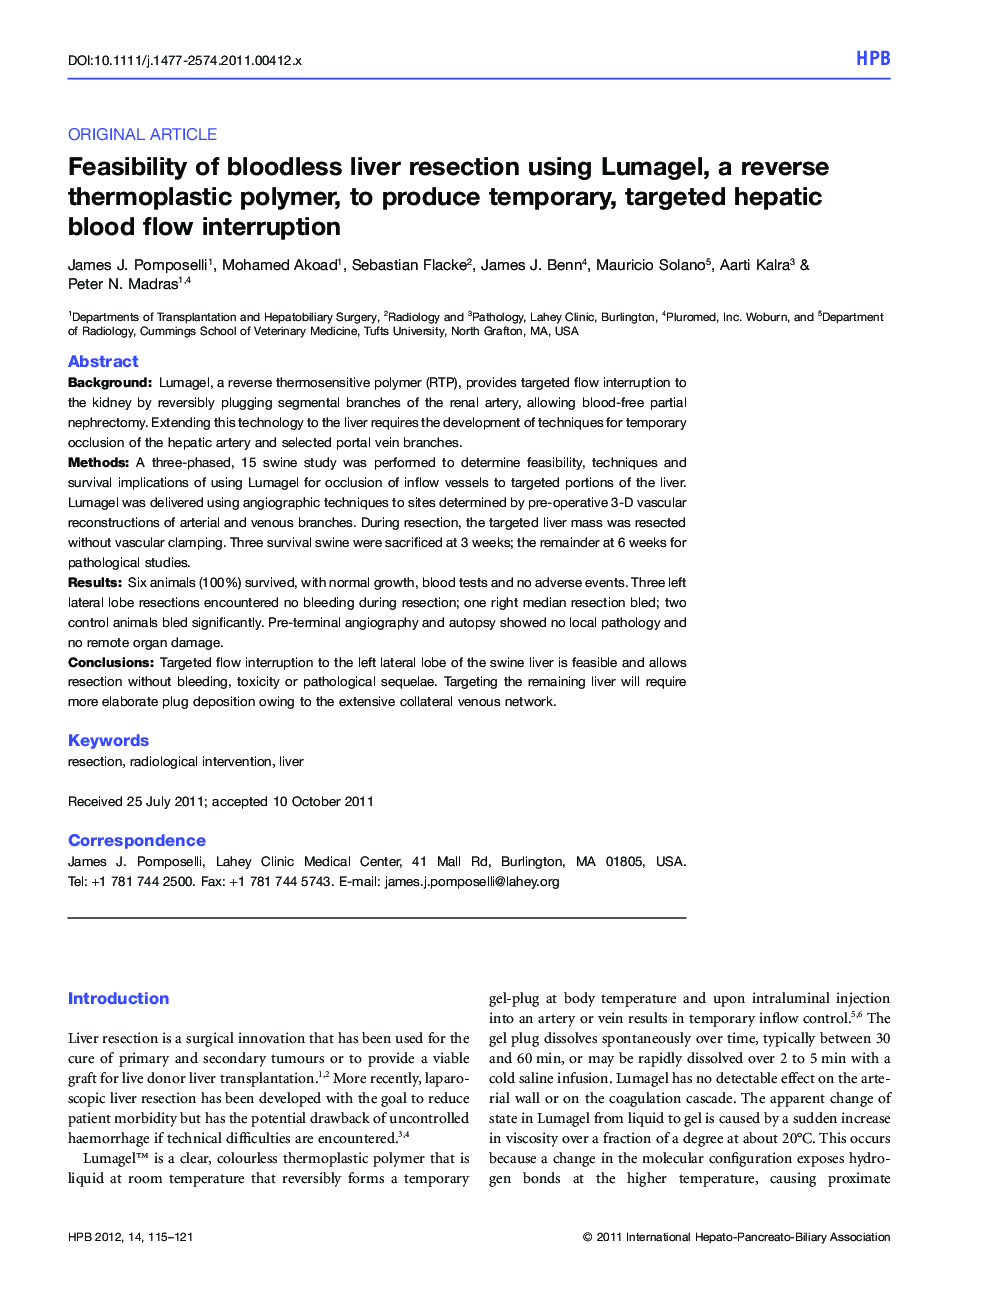 Feasibility of bloodless liver resection using Lumagel, a reverse thermoplastic polymer, to produce temporary, targeted hepatic blood flow interruption